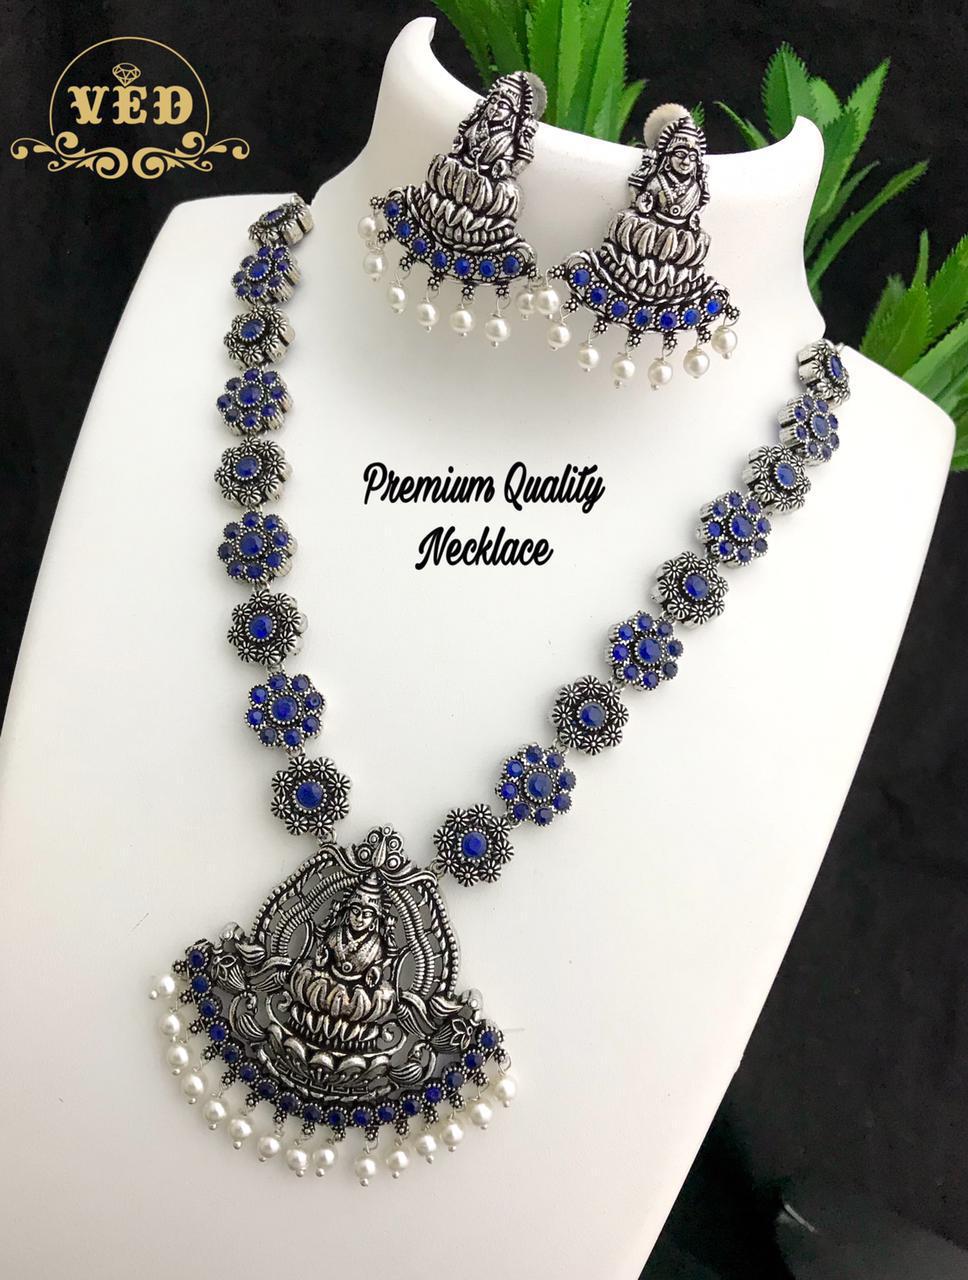 German Silver Temple Jewelry Dark Blue Stones Necklace with Matching Earrings